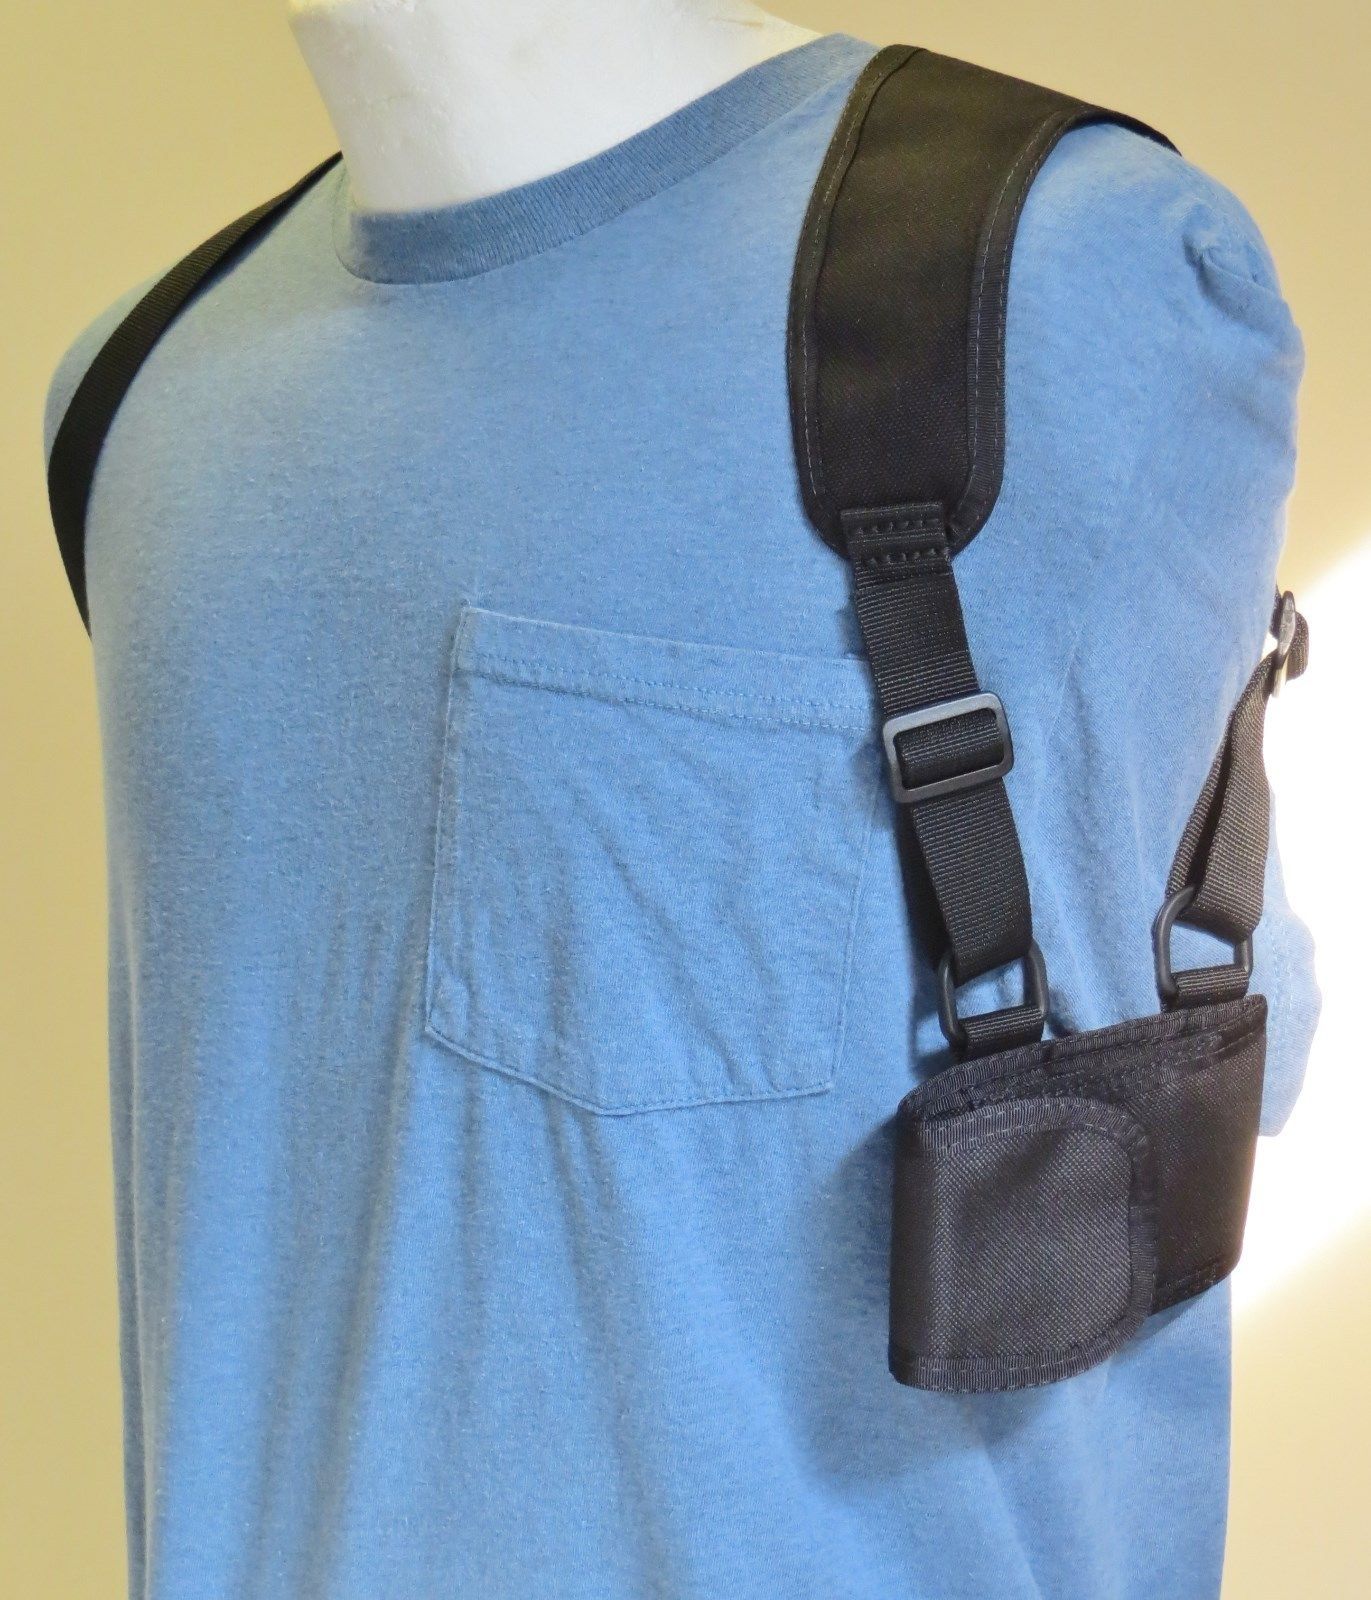 Cell Phone Shoulder Holster Fits Phones 5.6" TALL X 3" WIDE - Other